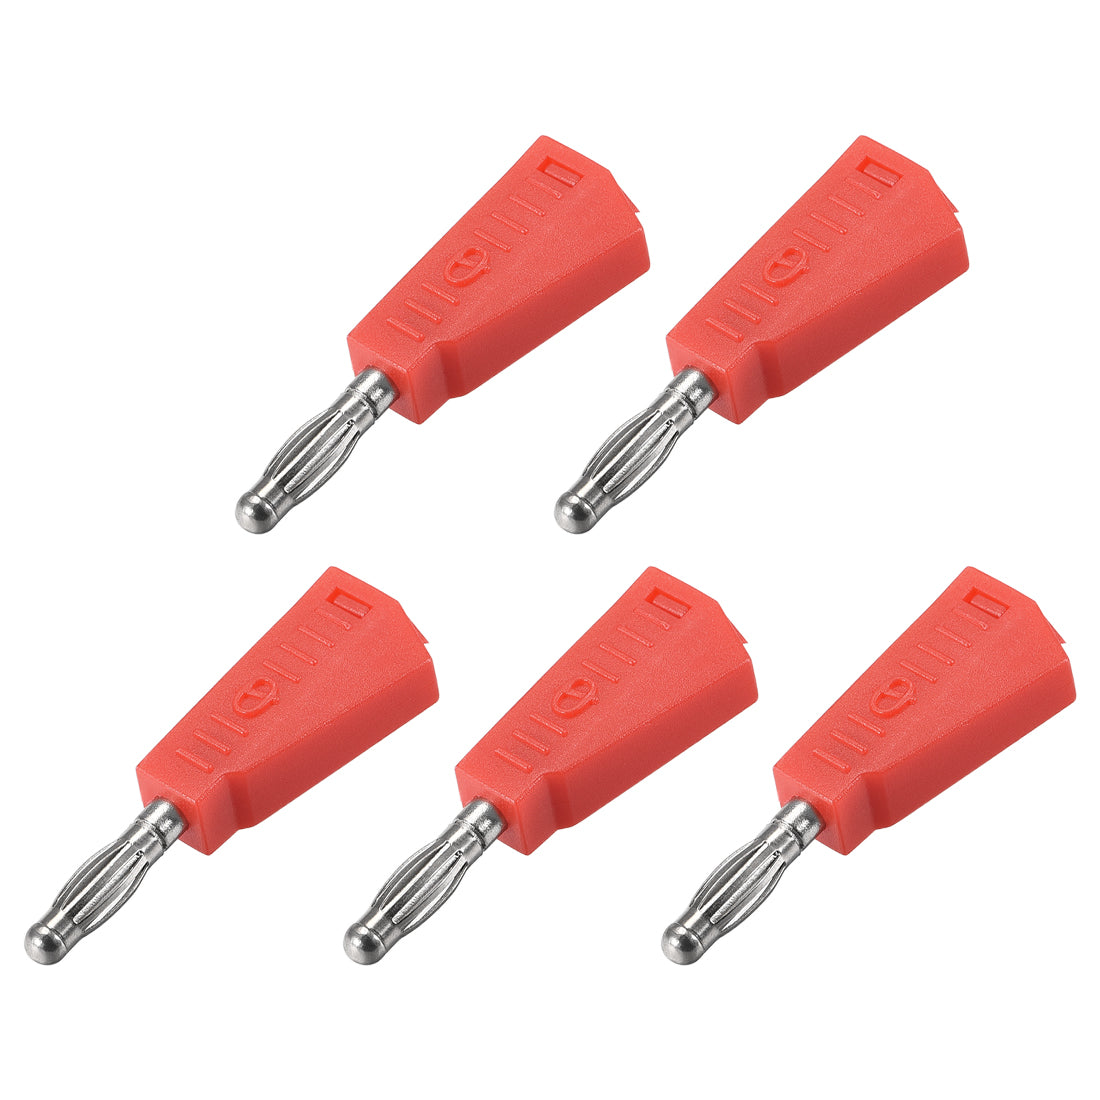 uxcell Uxcell 4mm Banana Speaker Wire Cable Plugs Connectors Red 20A Jack Connector 5pcs